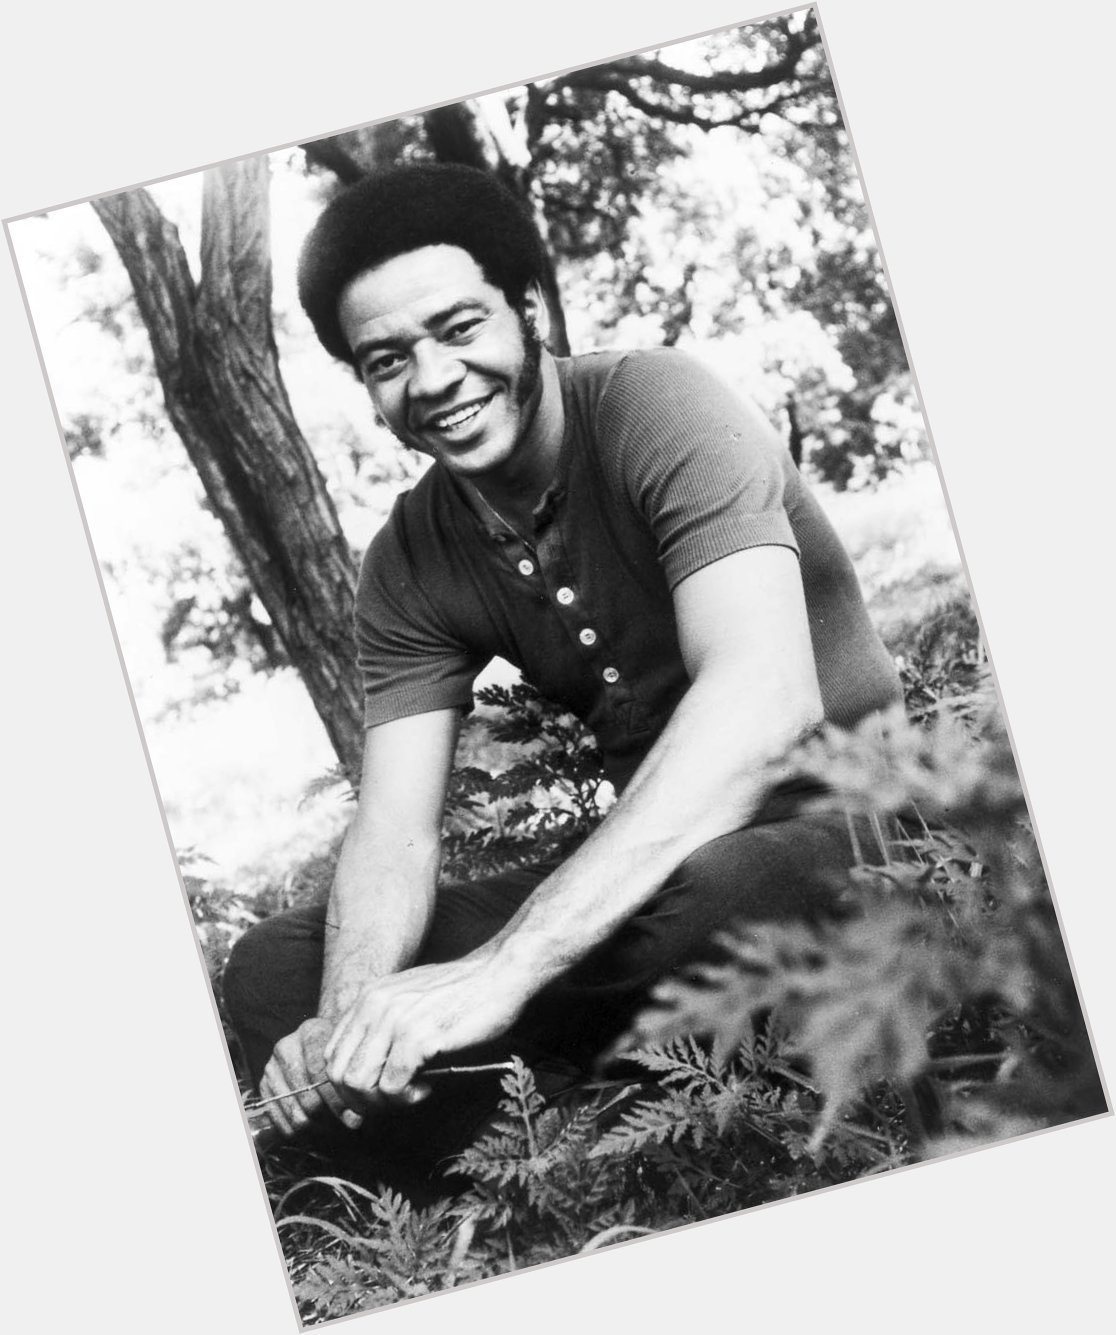 Anyways, happy birthday Bill Withers. The only thing I m celebrating this 4th of July. Rest In Power King 